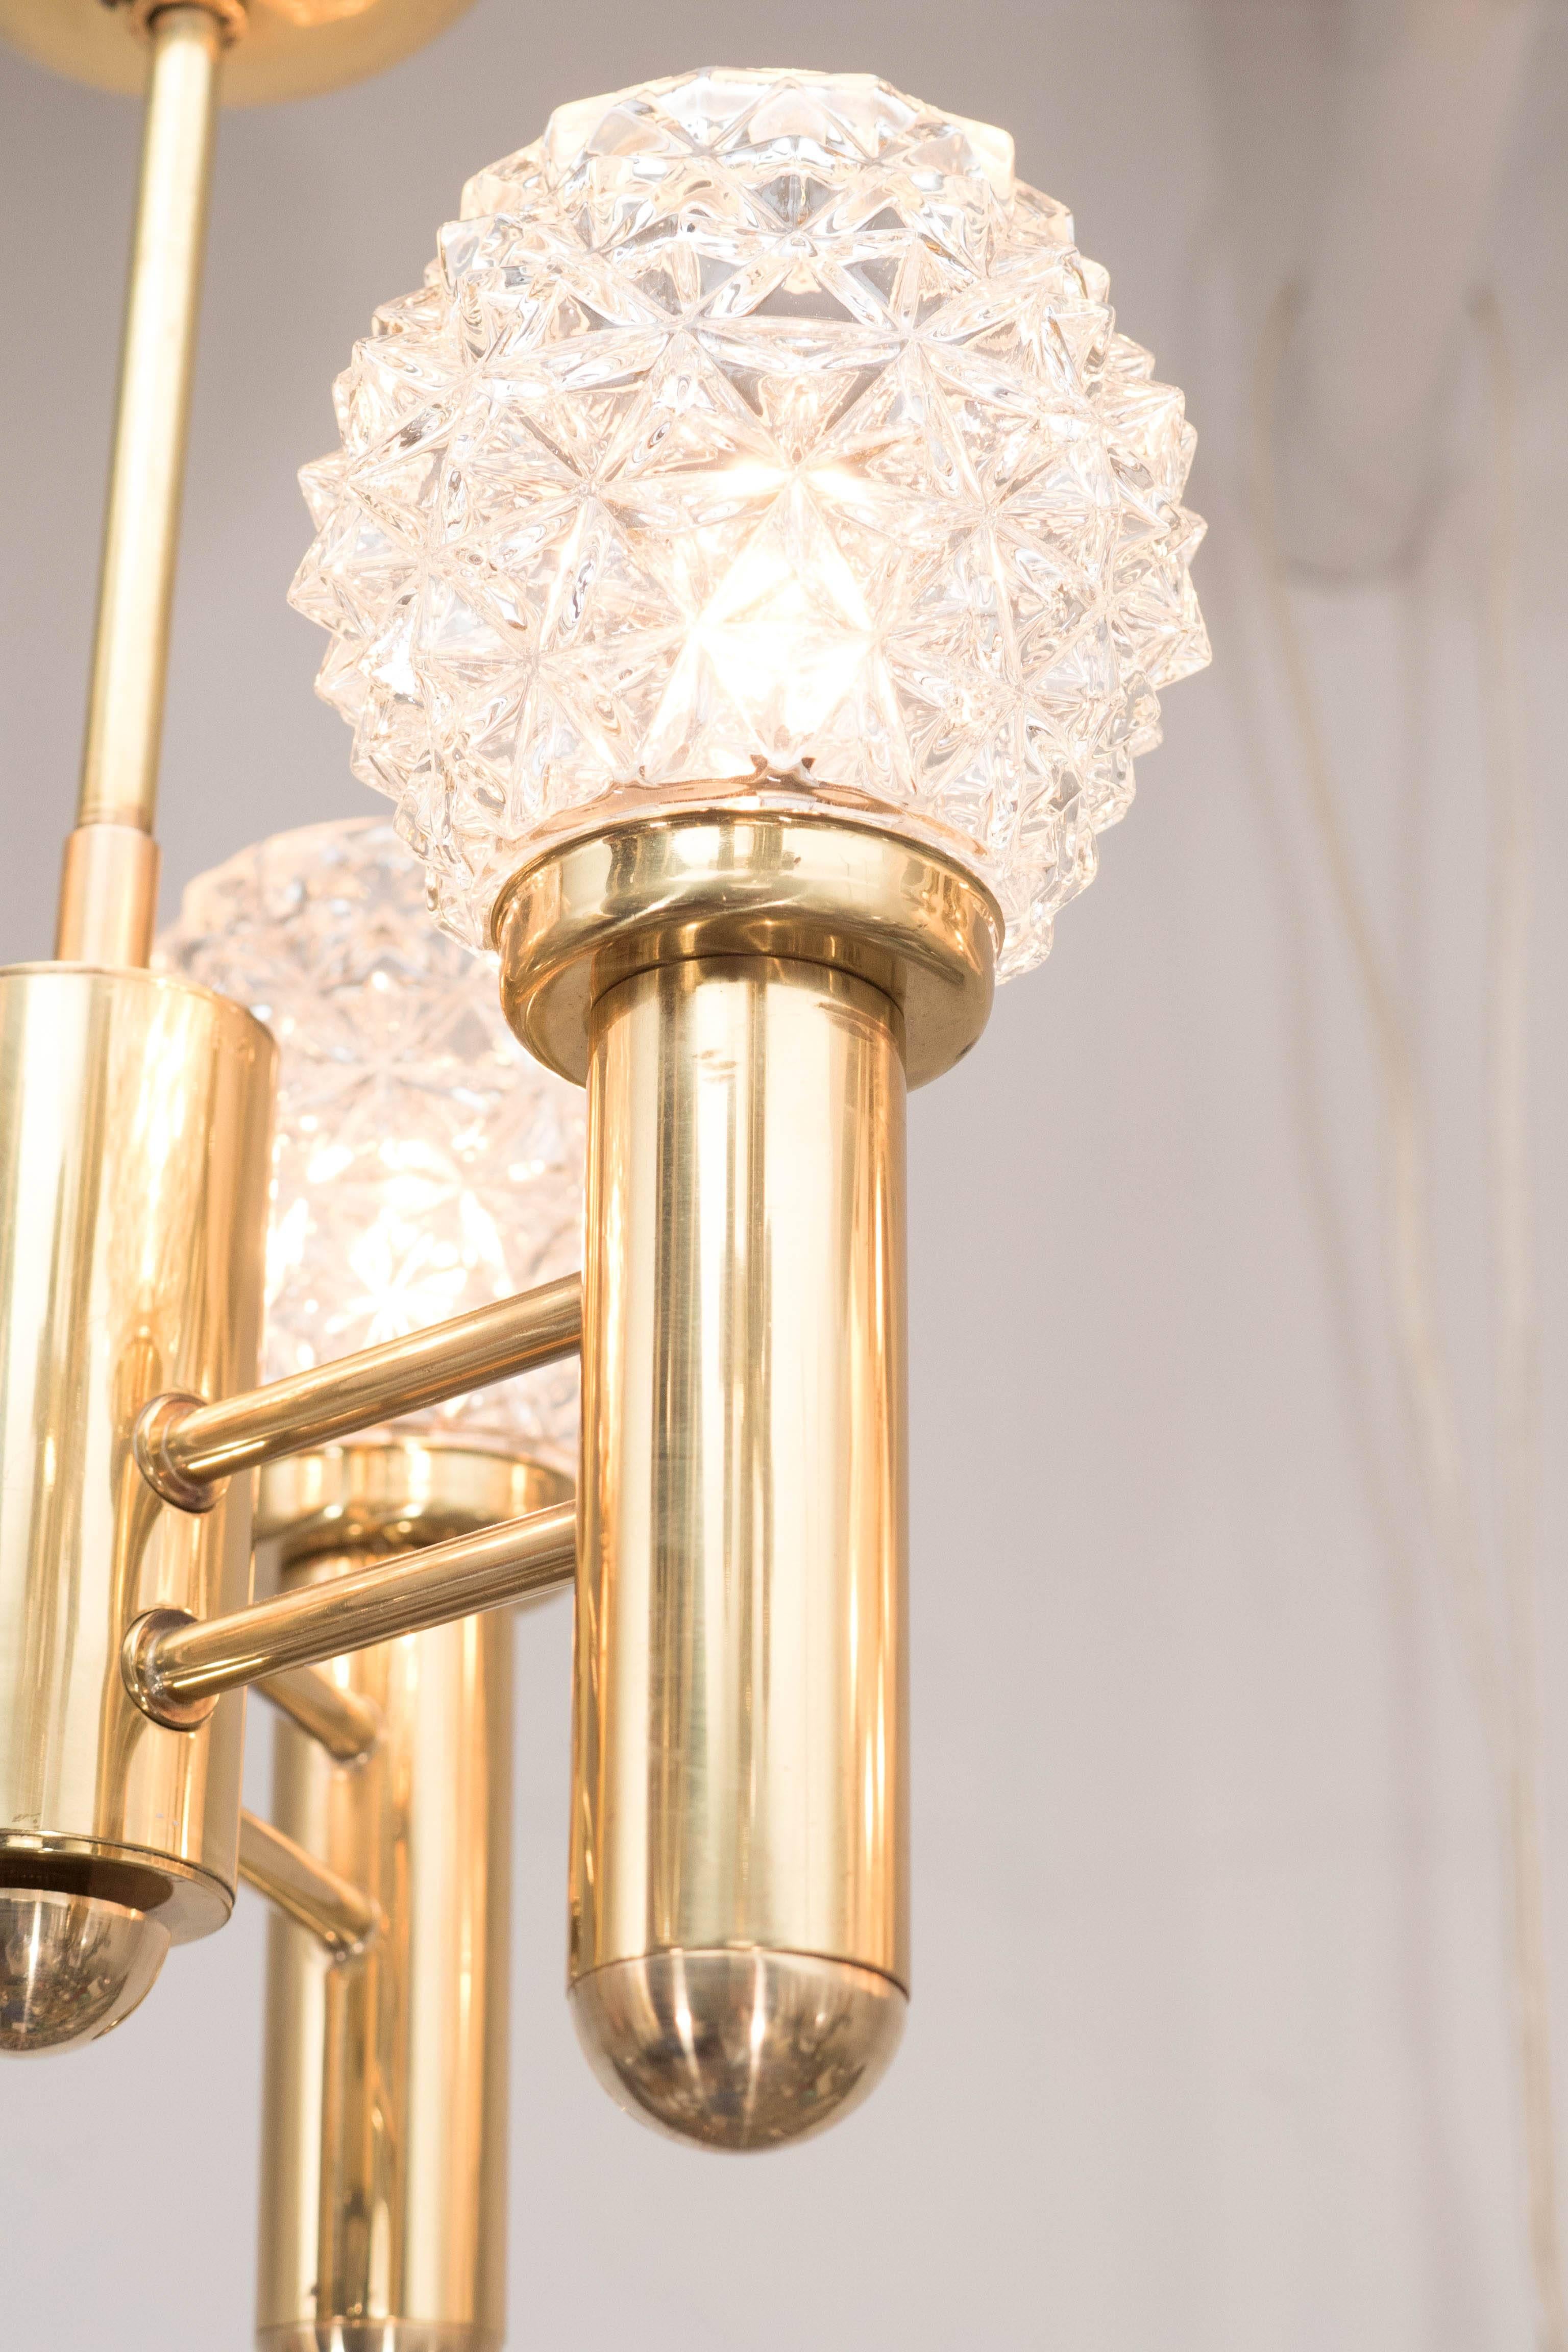 Mid-20th Century Chic Mid-Century Modern Three-Arm Brass Chandelier with Faceted Glass Globes